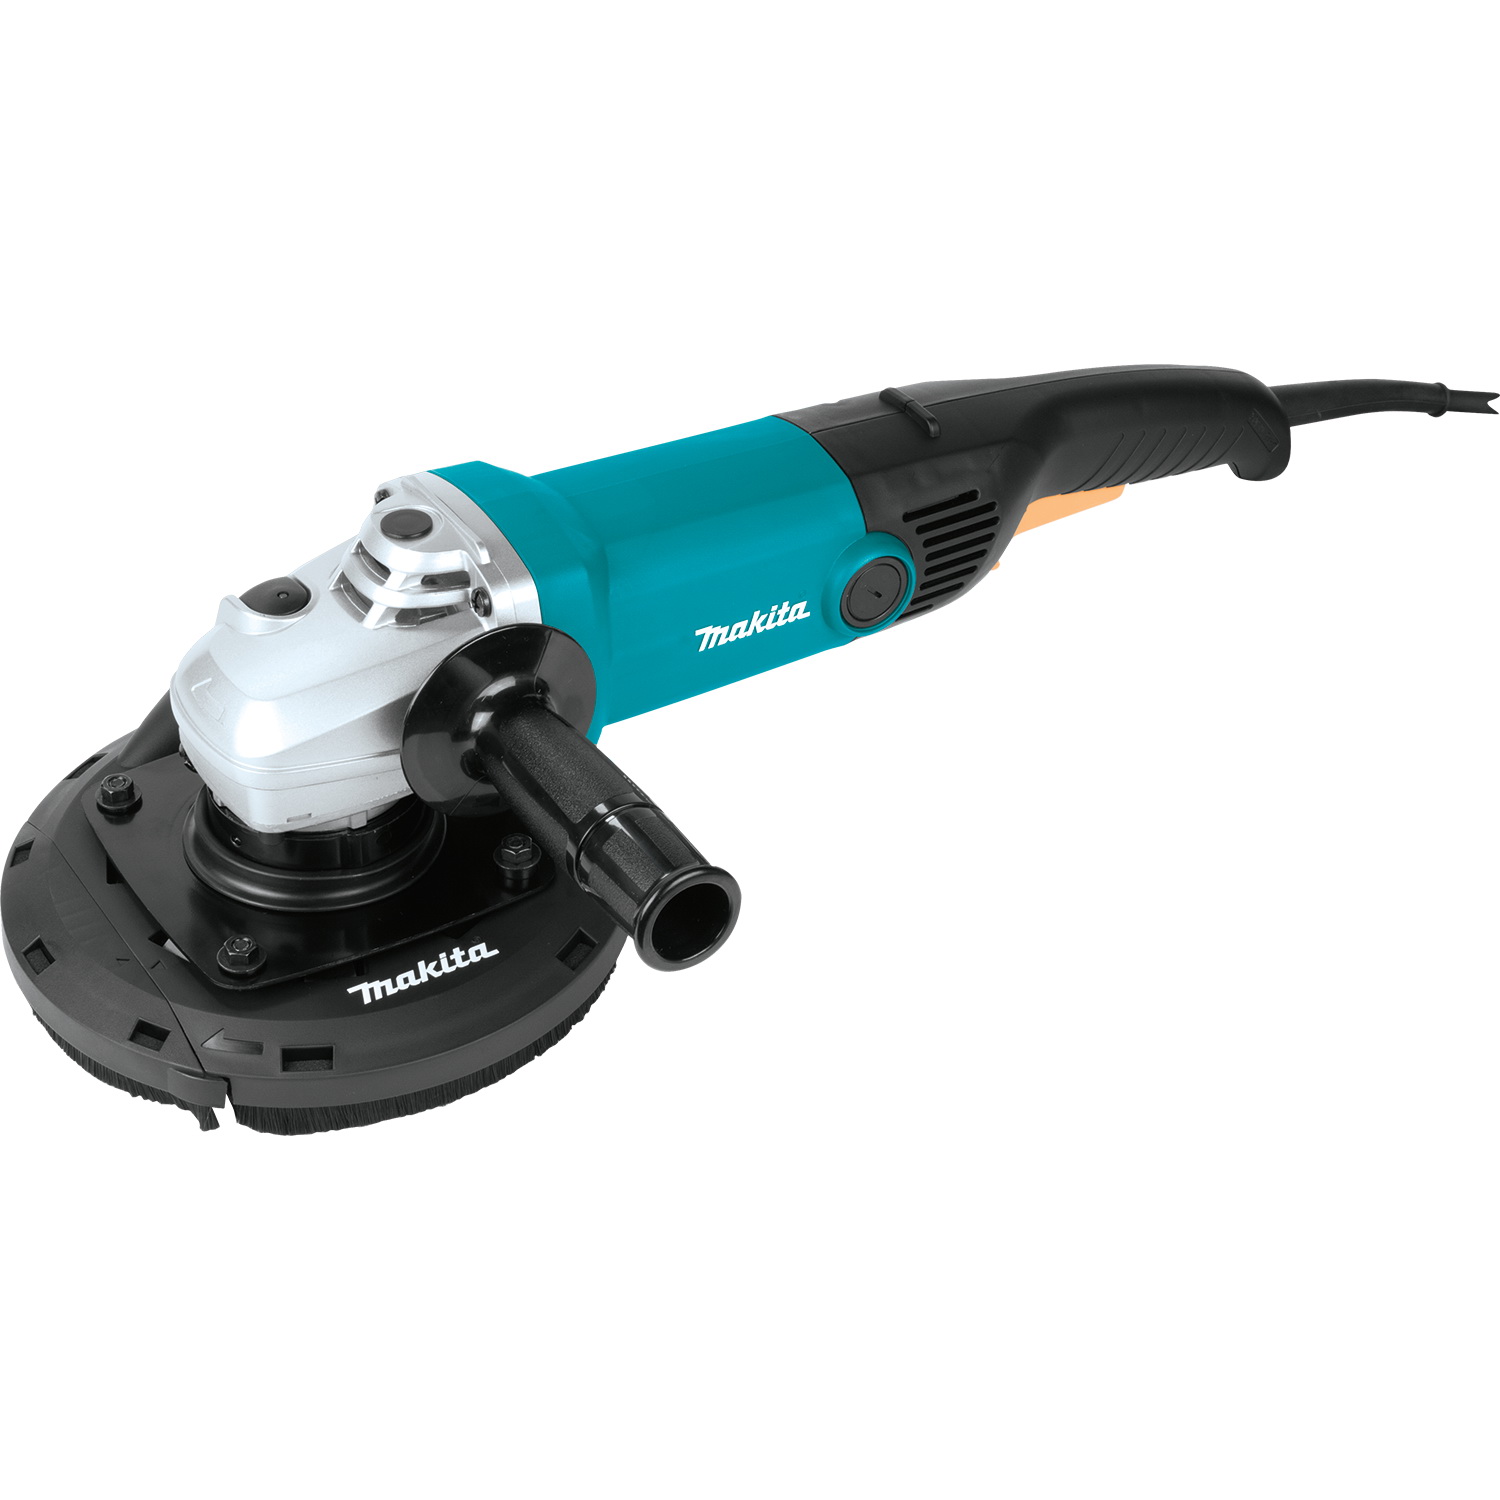 Makita GA7011C Angle Grinder, 15 A, 5/8-11 Spindle, 7 in Dia Wheel, 6000 rpm Speed - 2